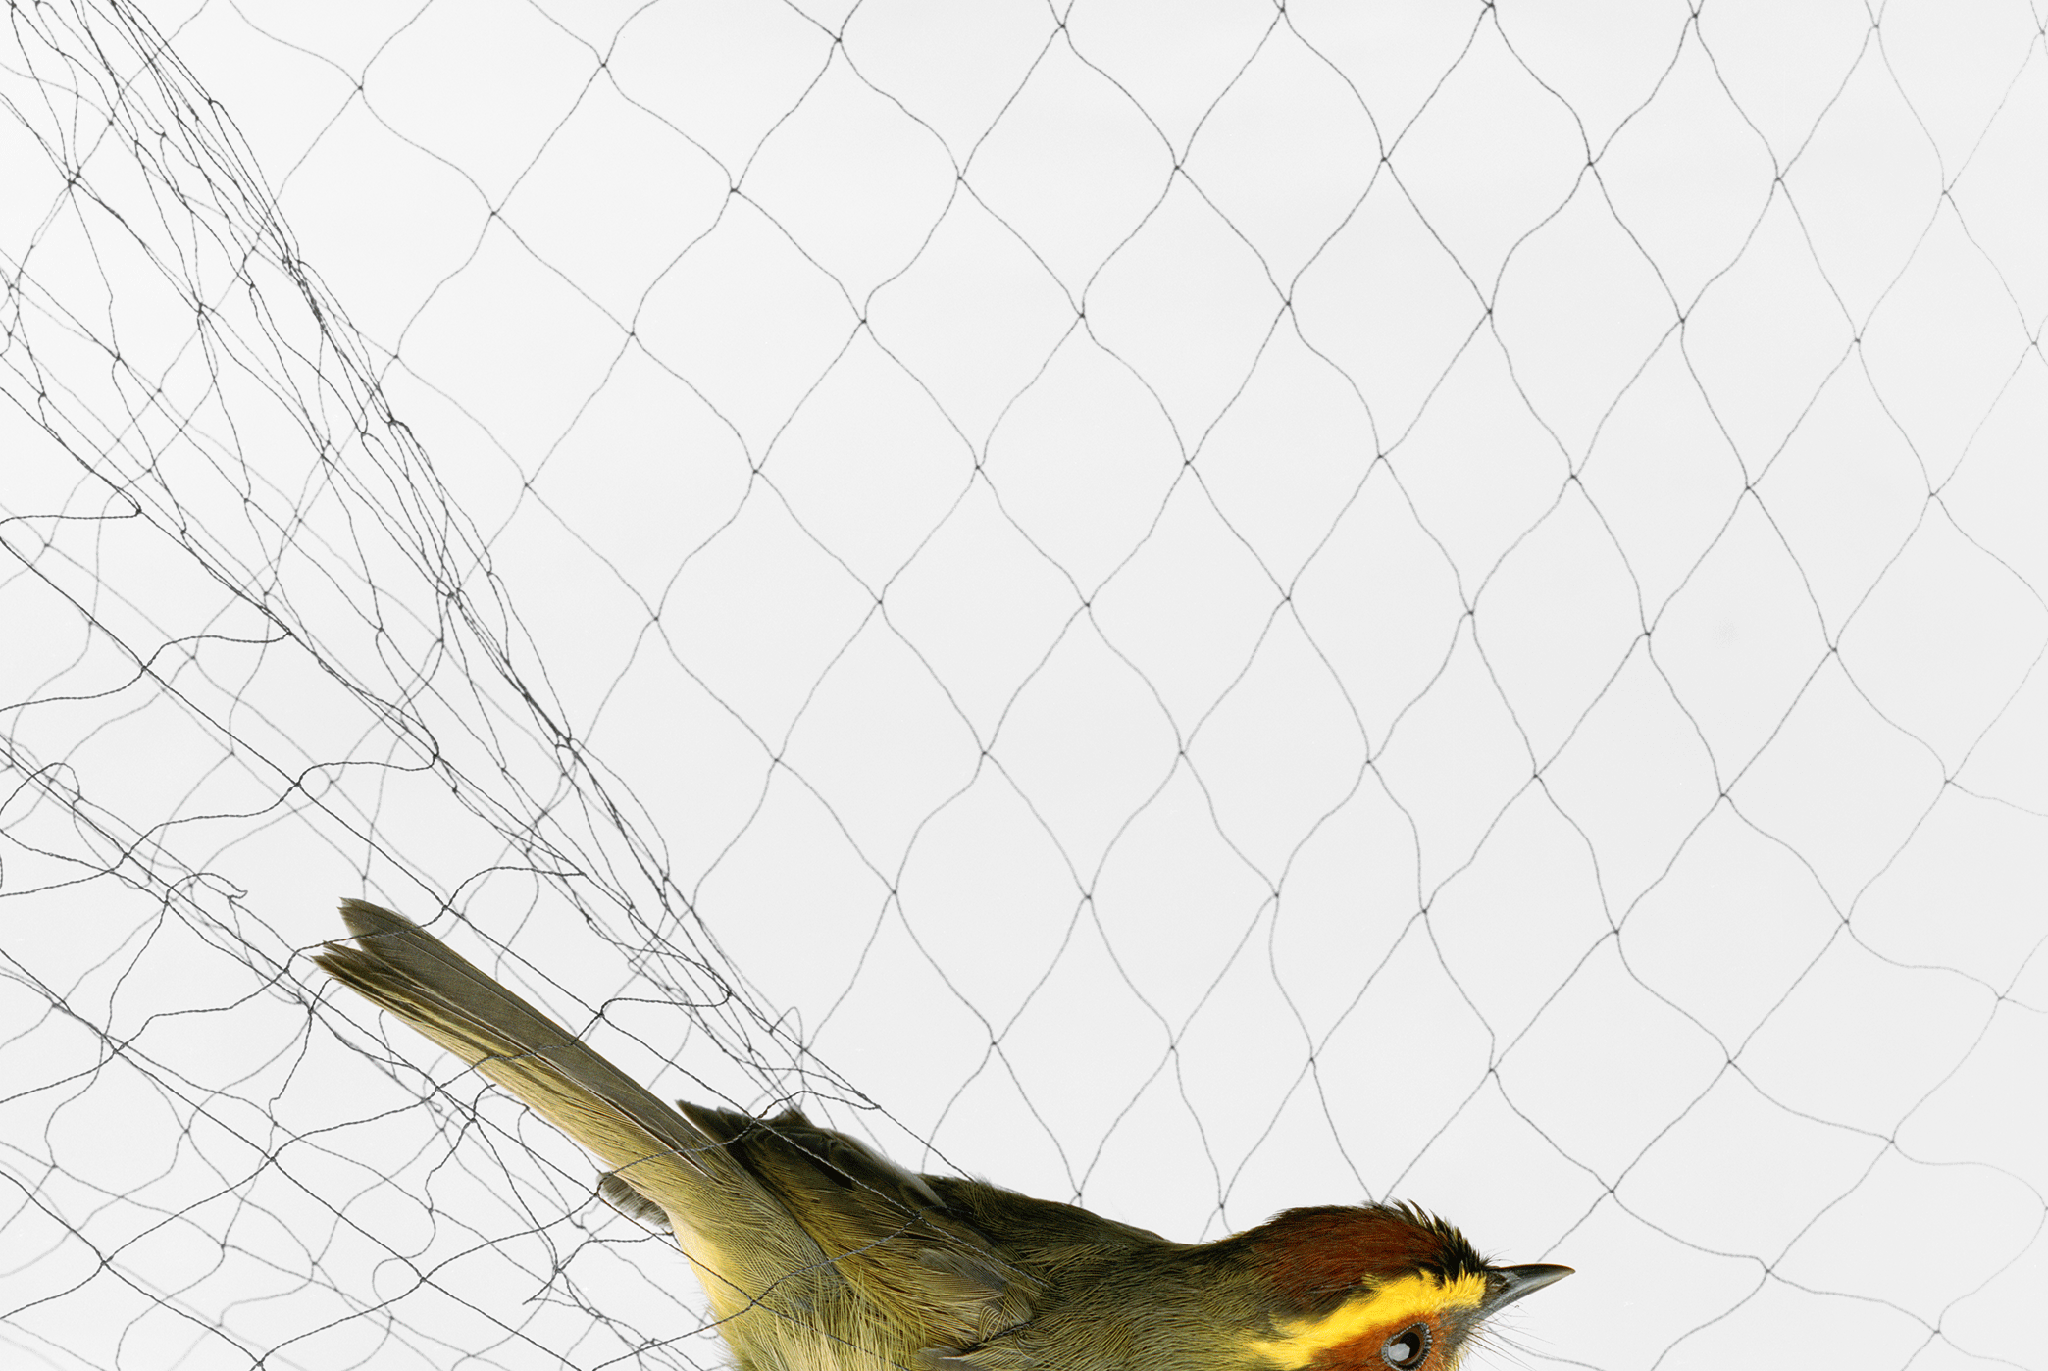 small bird caught in a net

yellow bird caught in a net

photographs by todd forsgren

do not use, only for cosmo feature use